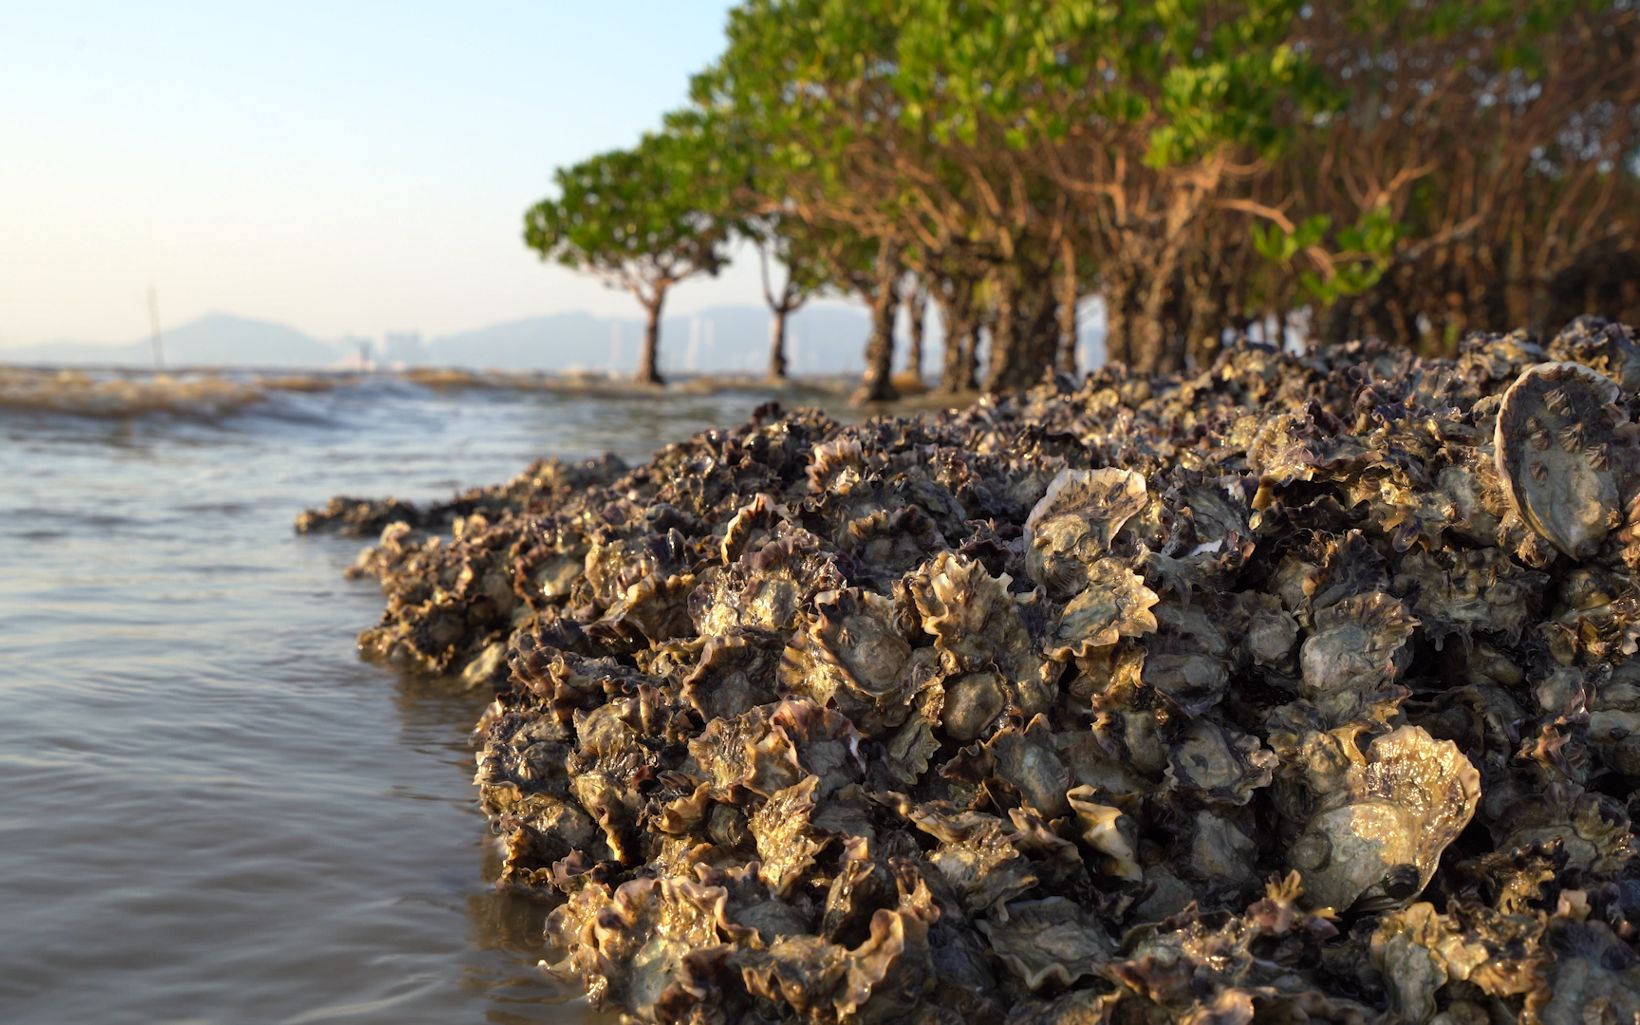 Bed of shellfish reefs and a shoreline dotted with mangroves